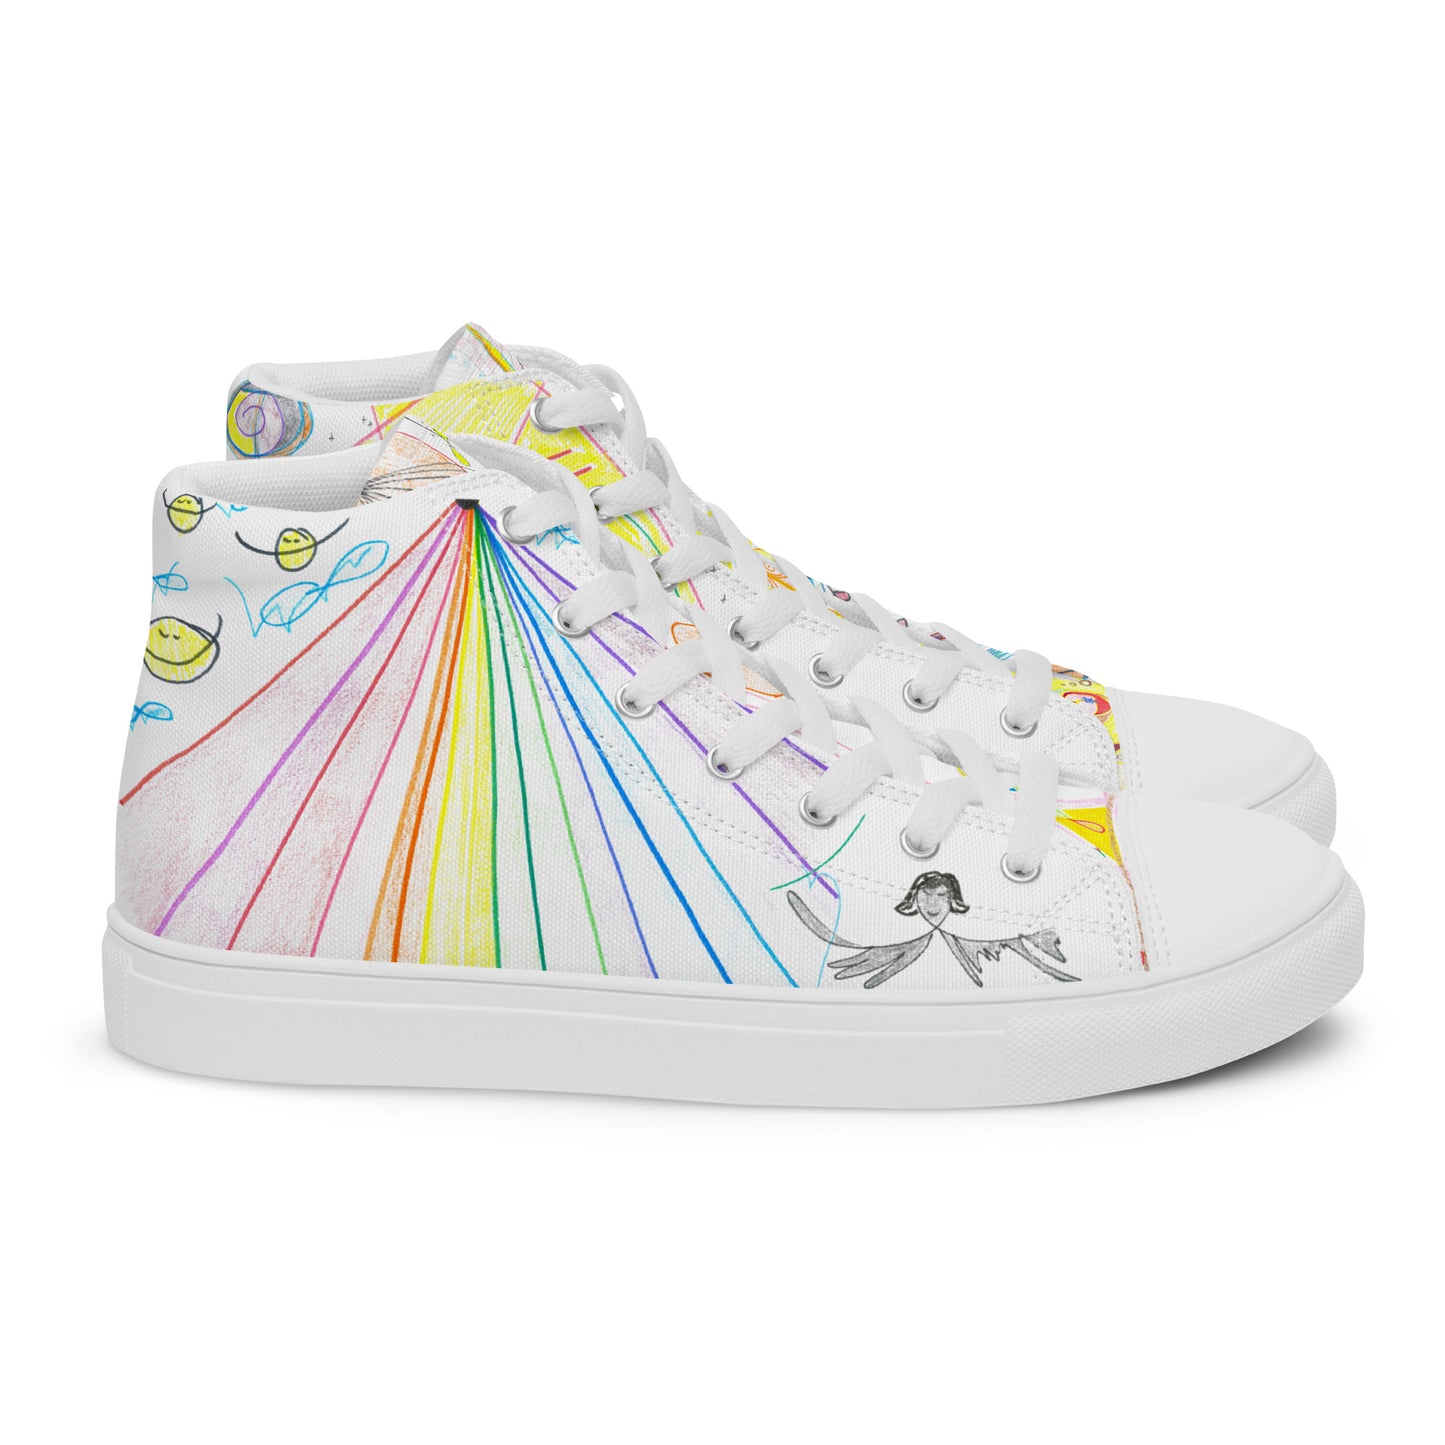 The View From Here, feminine high-top sneakers